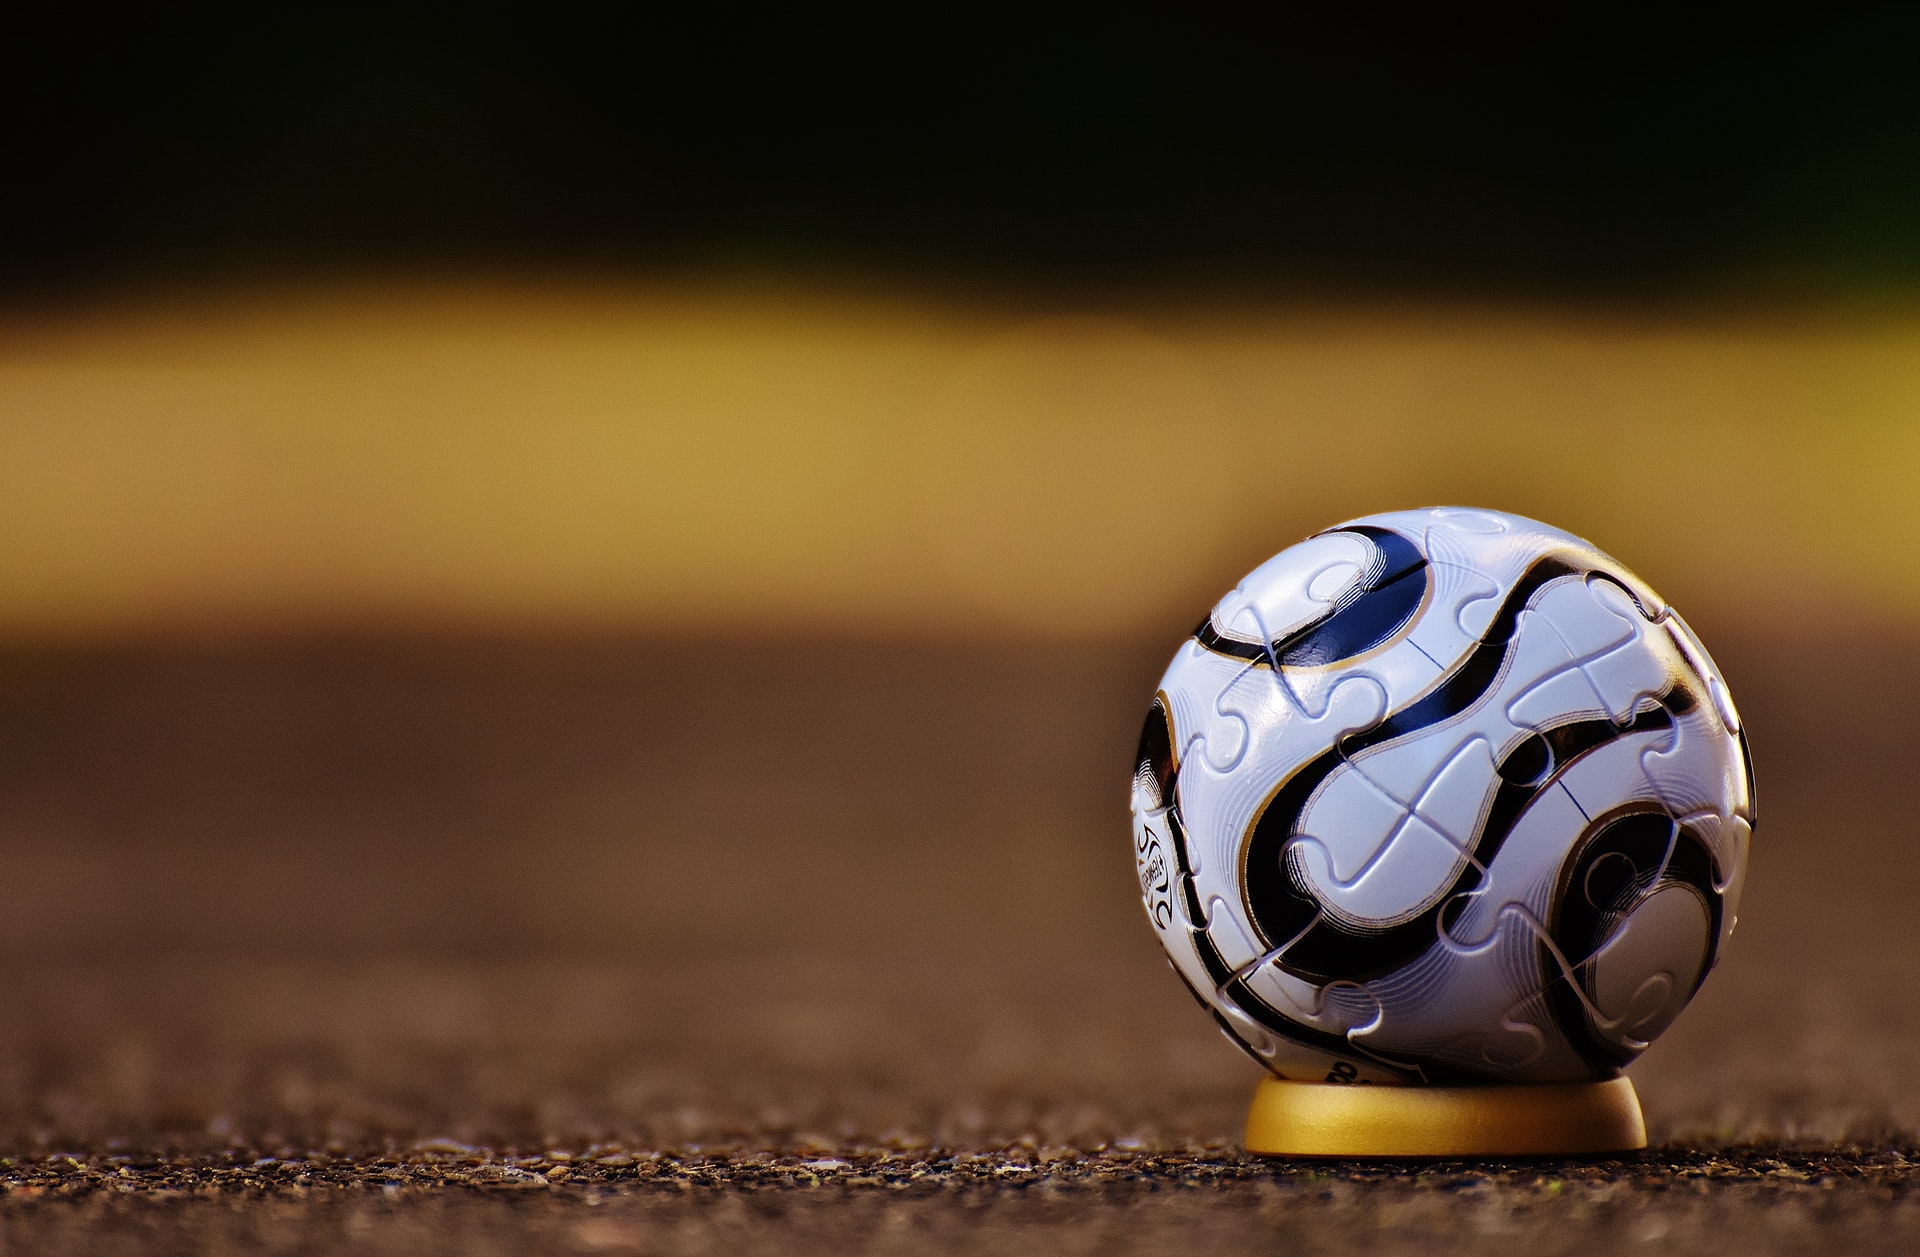 Soccer ball on stand